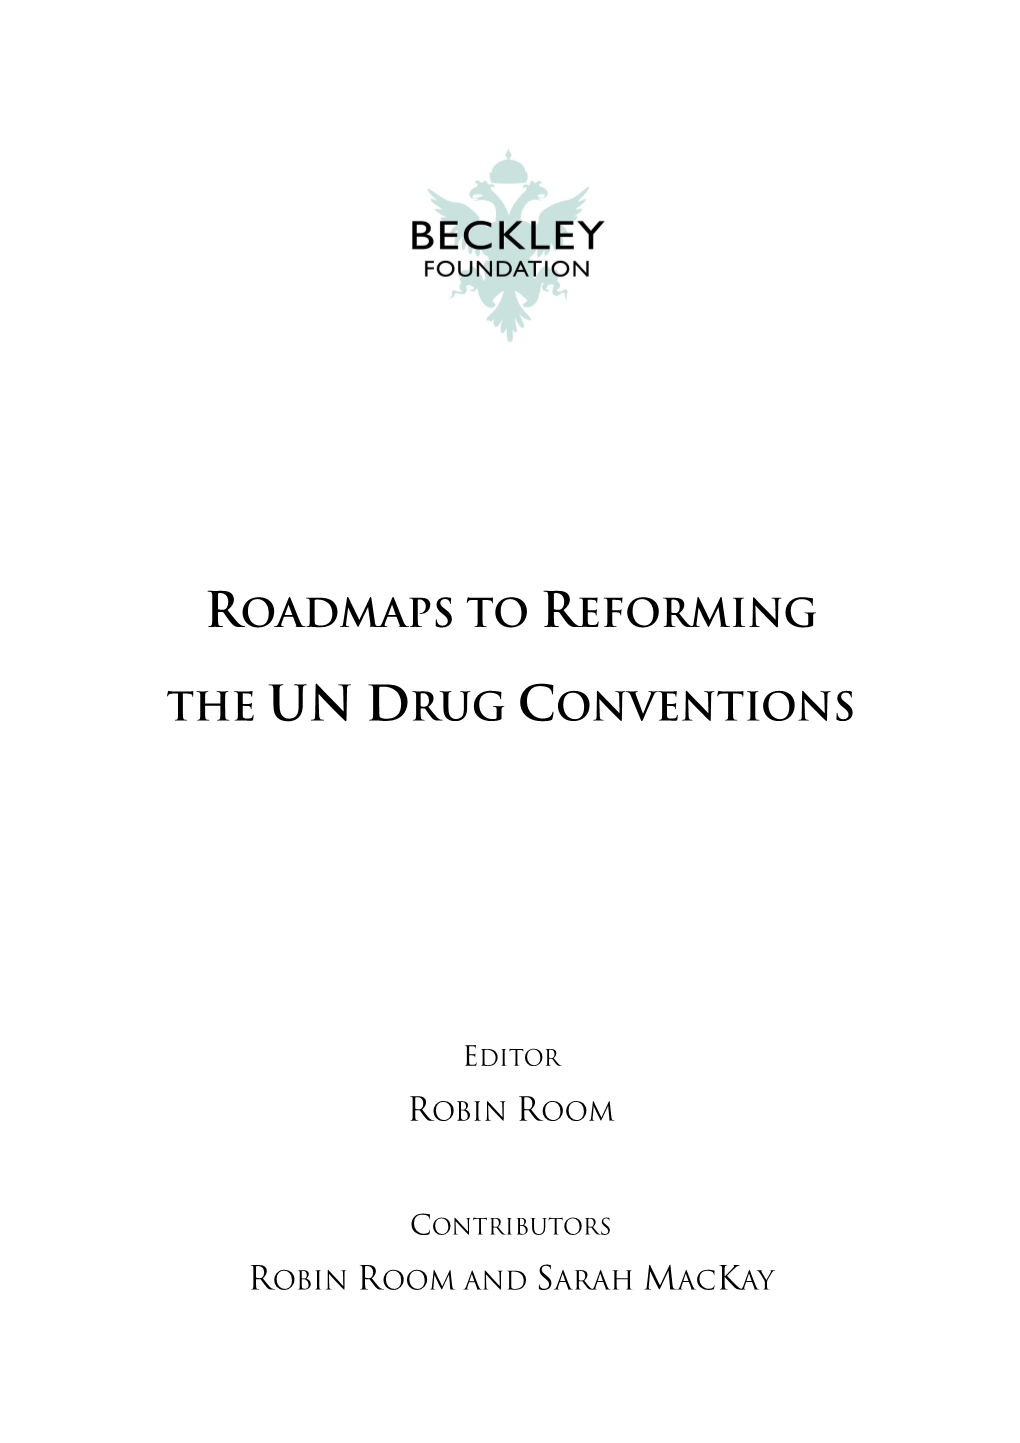 Report Roadmaps for Reforming the UN Drug Conventions